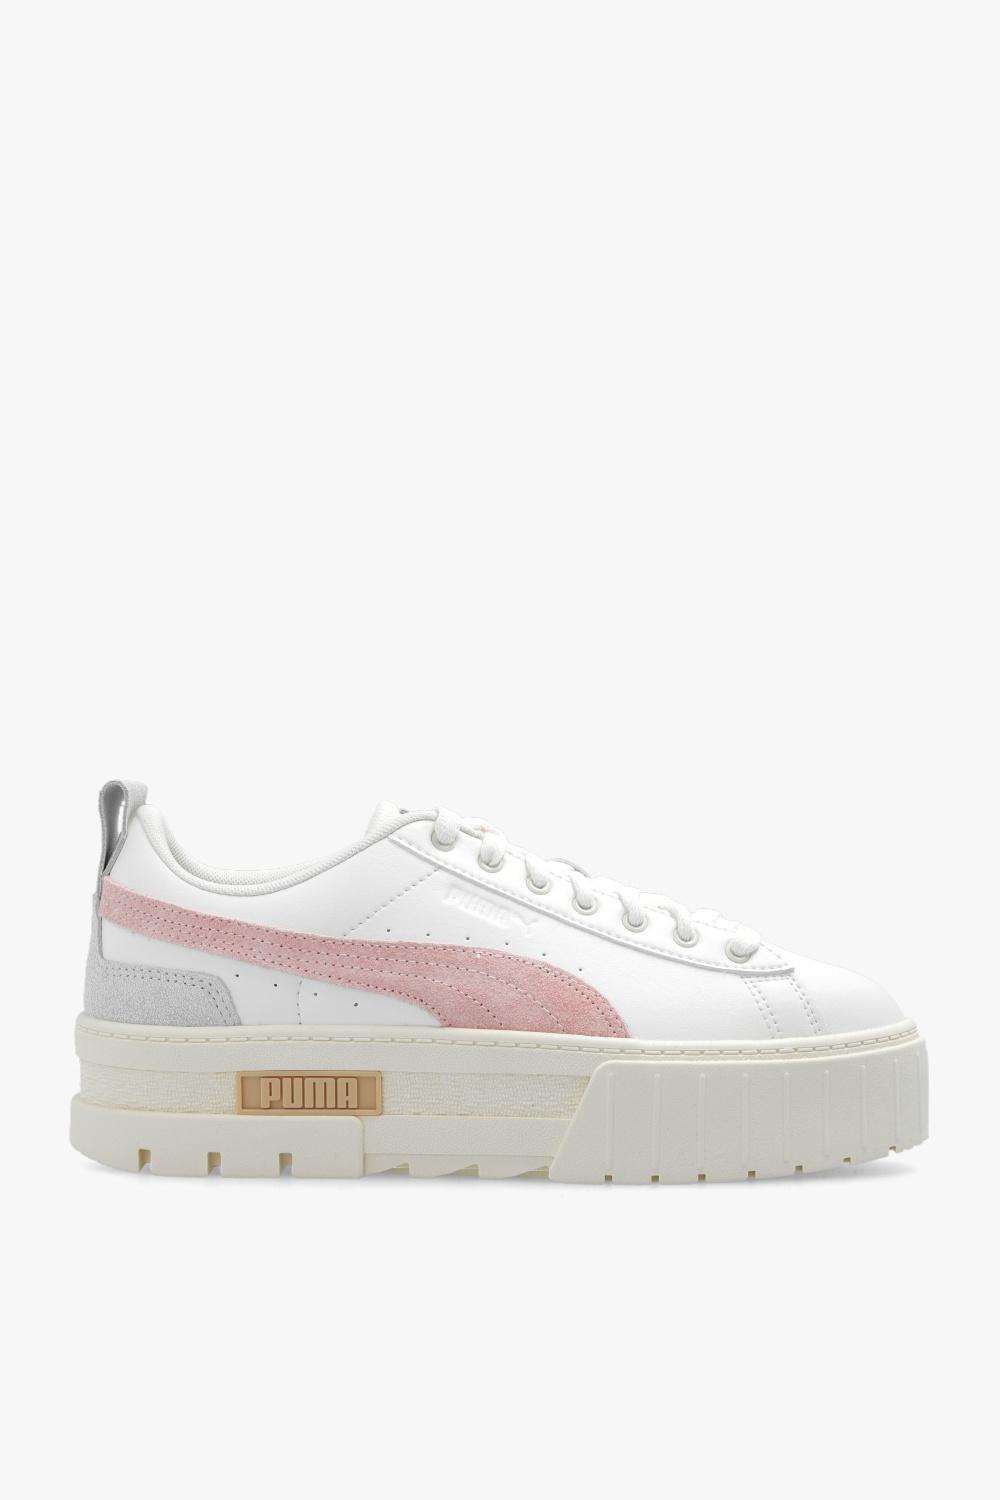 PUMA 'mayze Thrifted' Platform Sneakers in White | Lyst Canada